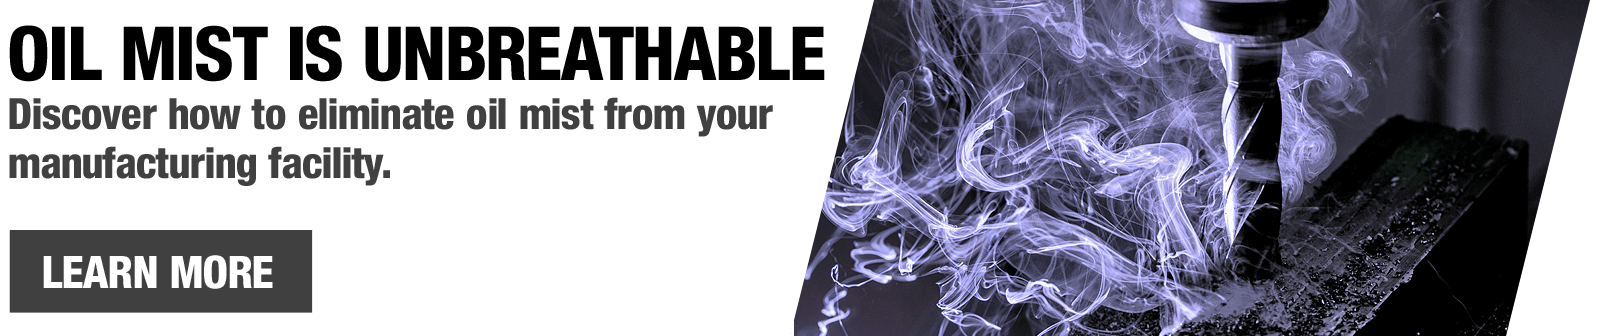 Discover how to safely eliminate harmful oil smoke and mist from your facility